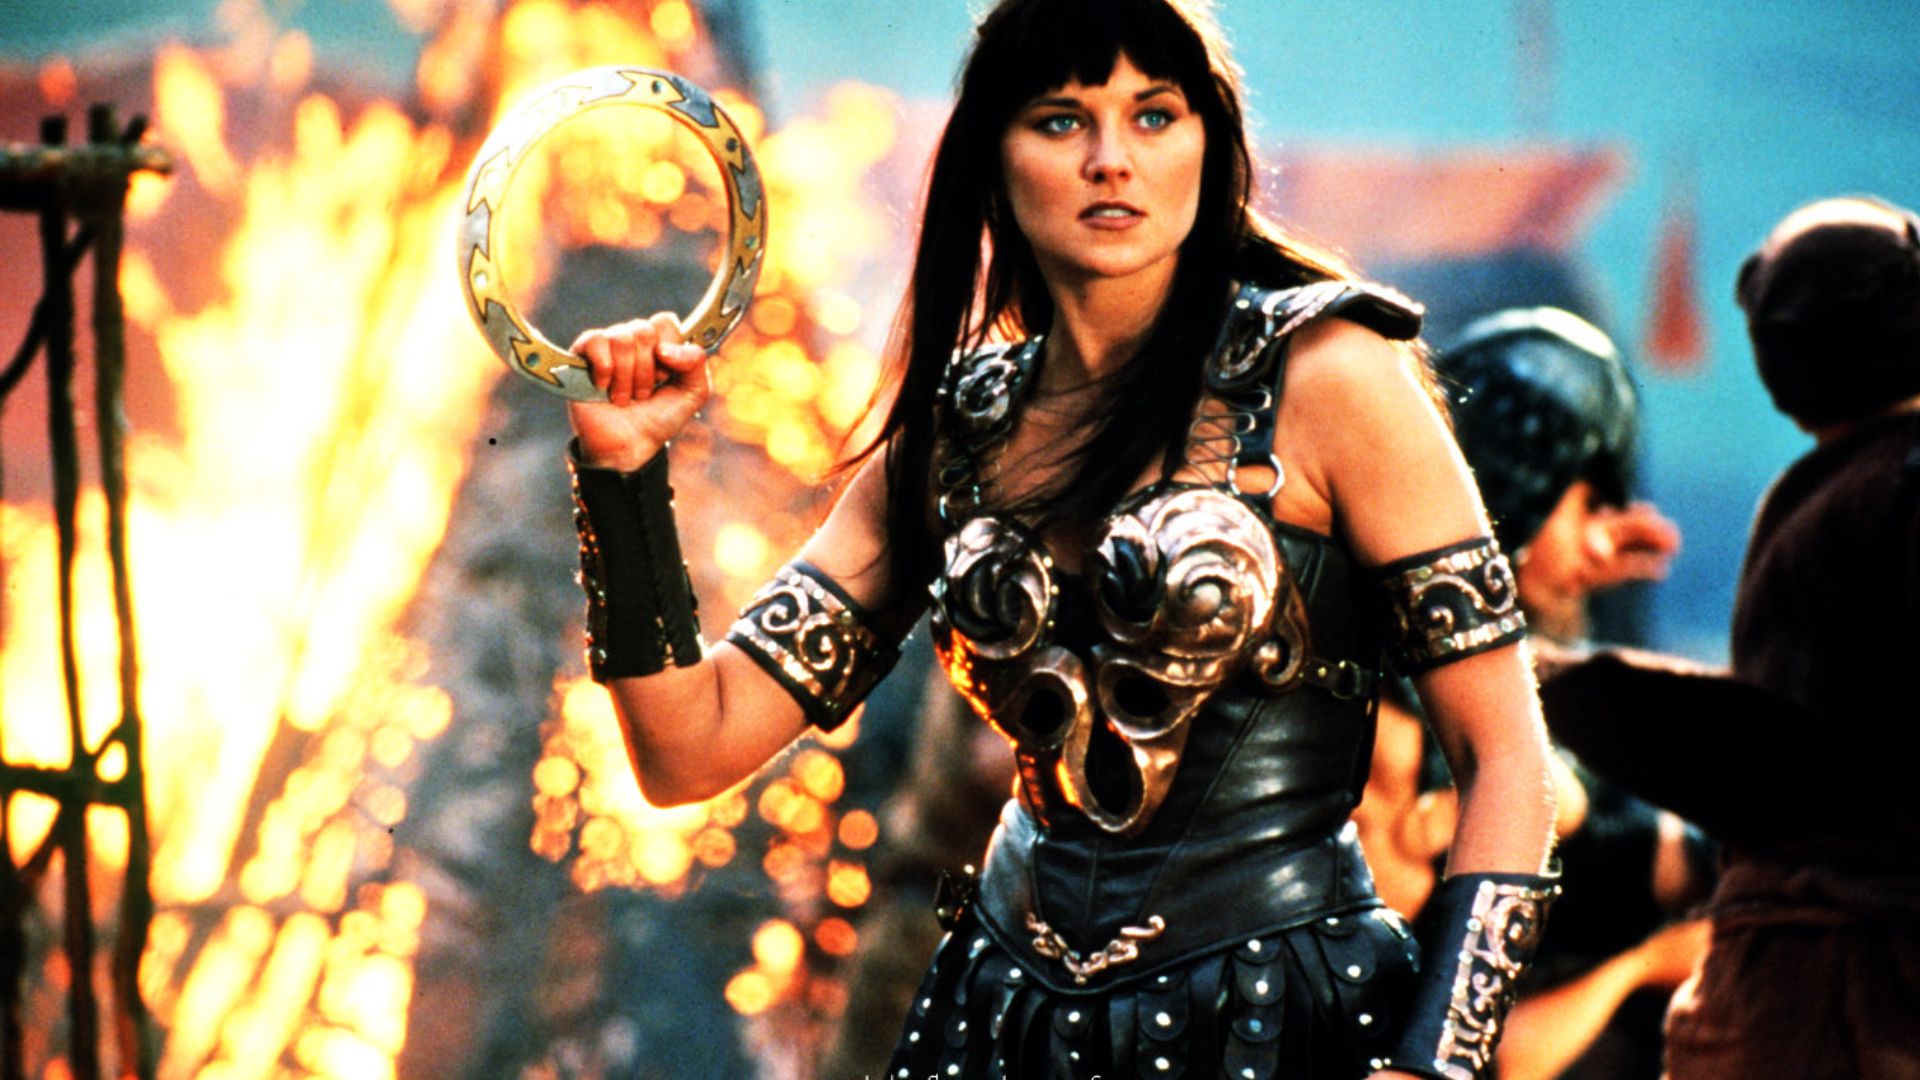  Lucy Lawless From A Movie